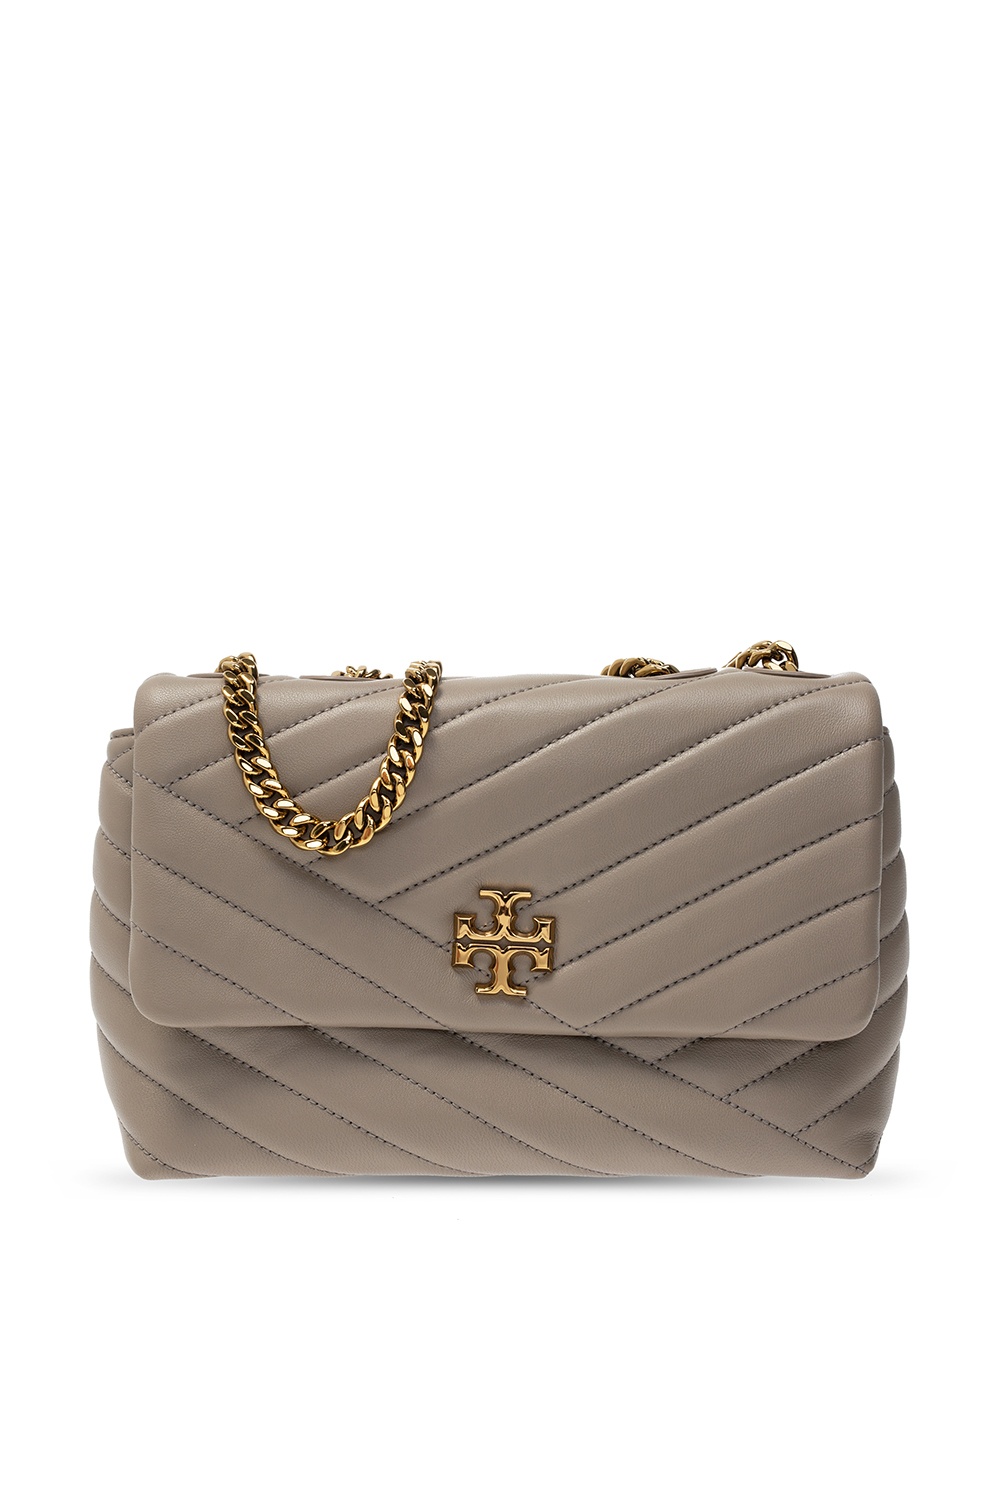 Tory Burch Kira Quilted-leather Shoulder Bag